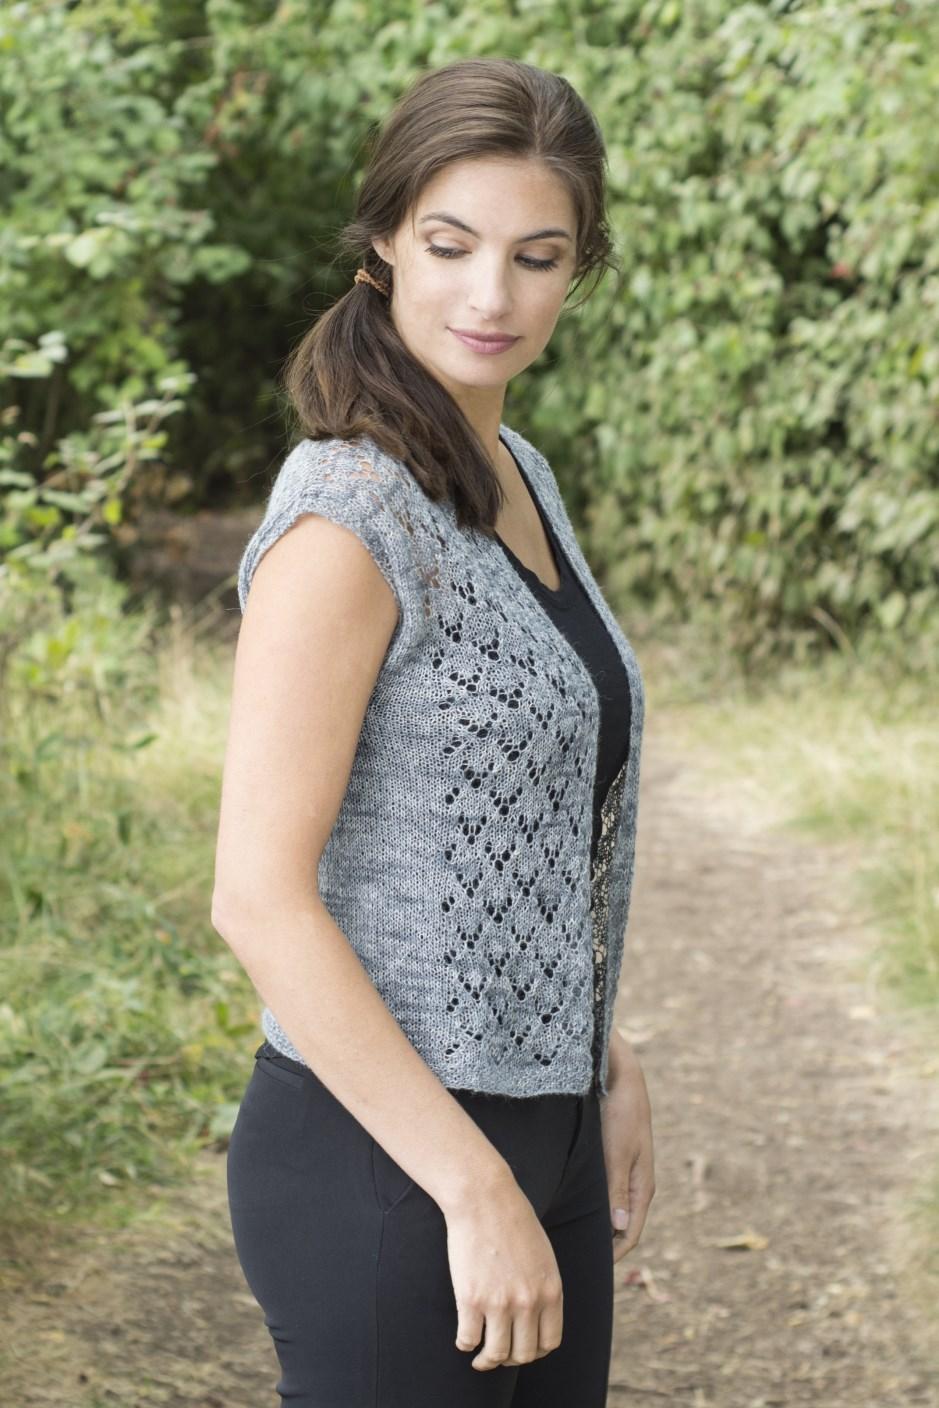 Alpaca Lace Peruvian Tones Whisper Vest Designed by Cheryl Beckerich Skill Level: Sizes Gauge: 22 sts x 32 rows = 4 (10 cm) in Stockinette stitch 20 sts x 32 rows = 4 (10 cm) in Lace pattern